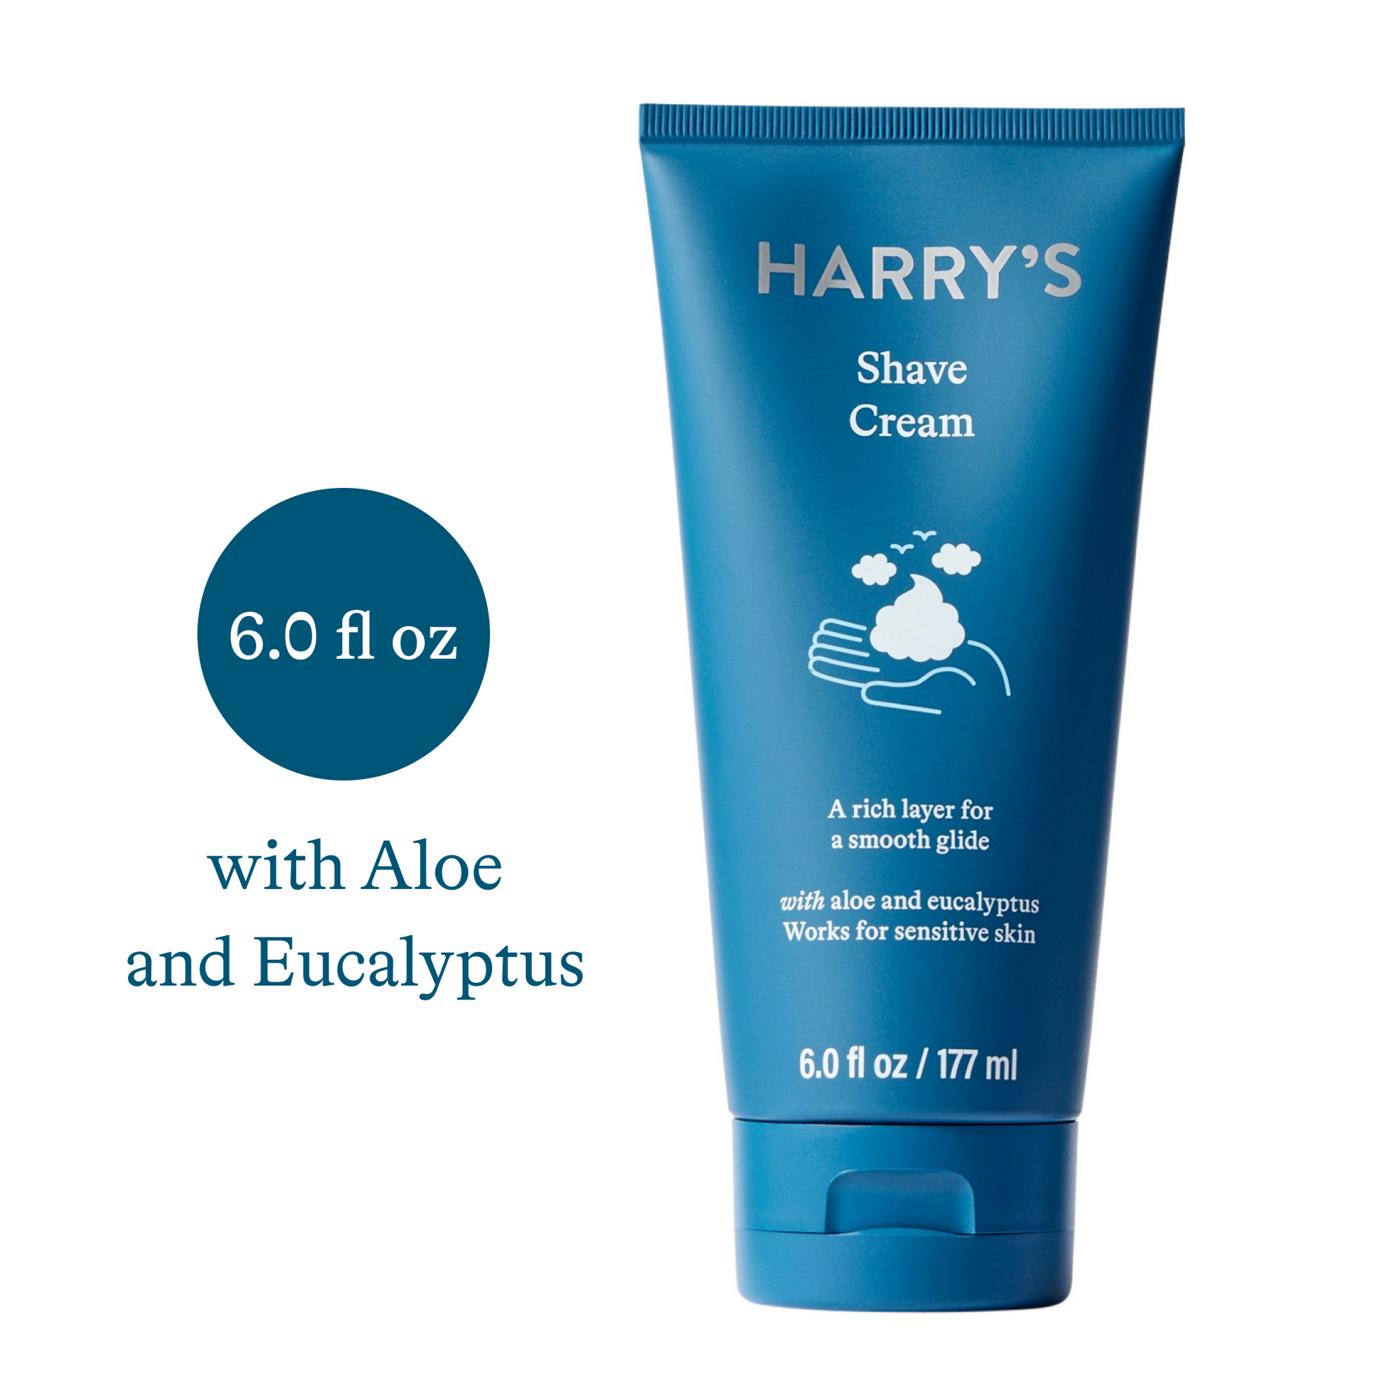 Harry's Shave Cream; image 2 of 2